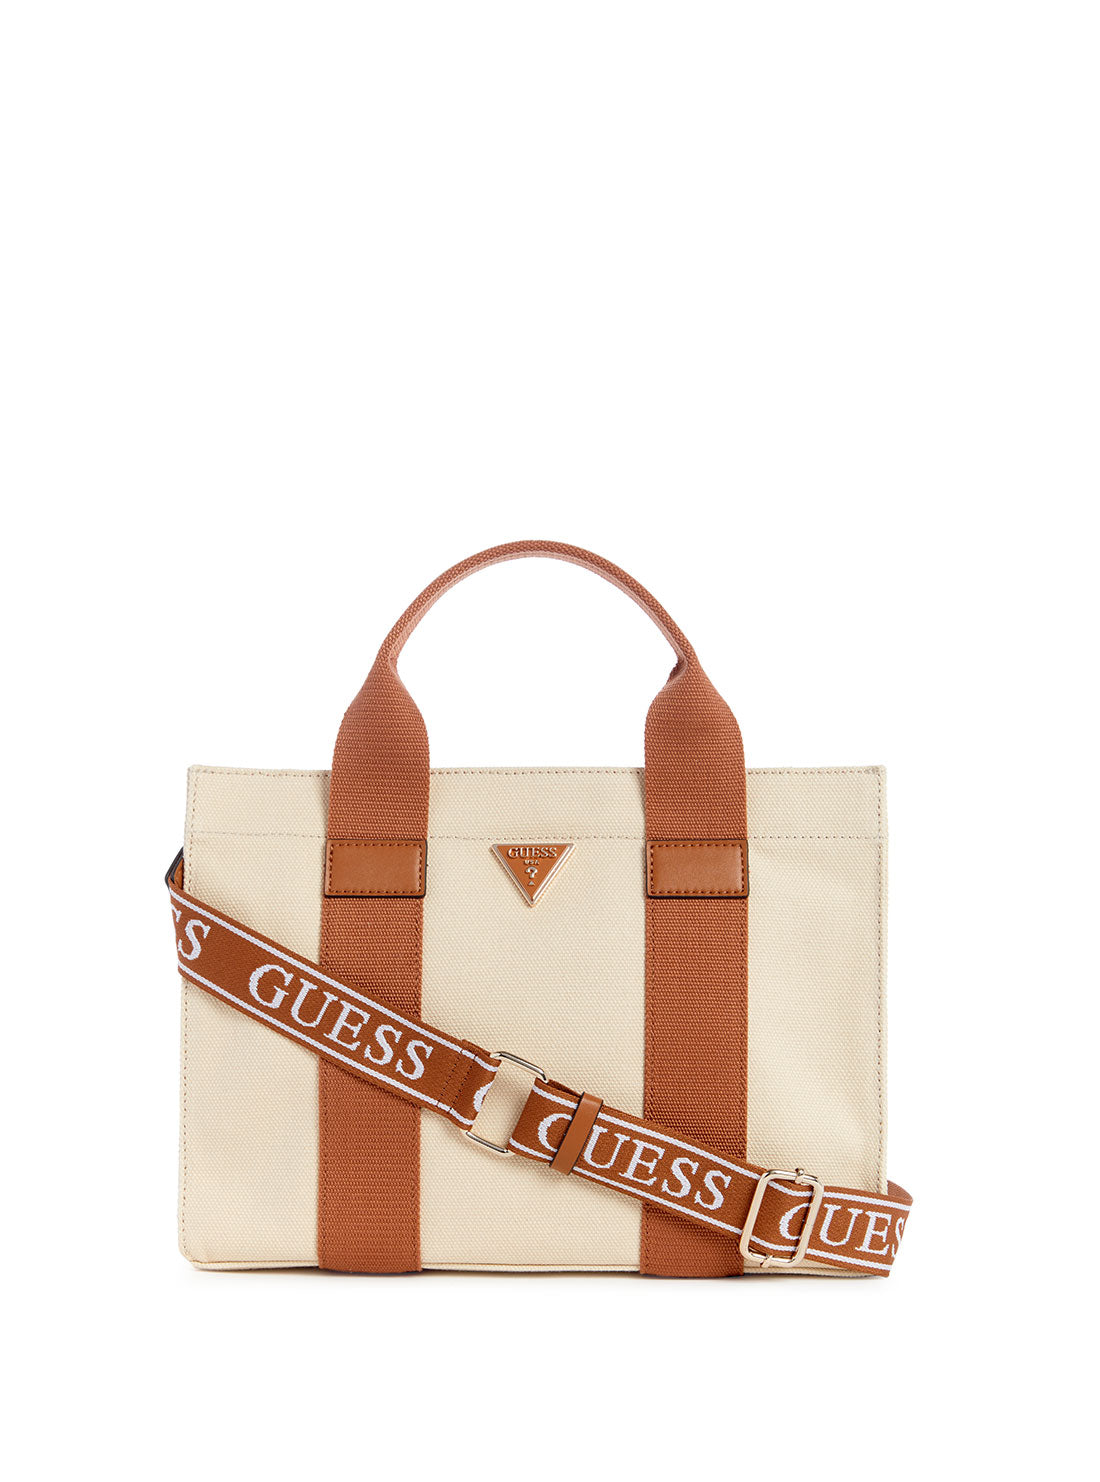 GUESS Beige Brown Canvas Small Tote Bag front view